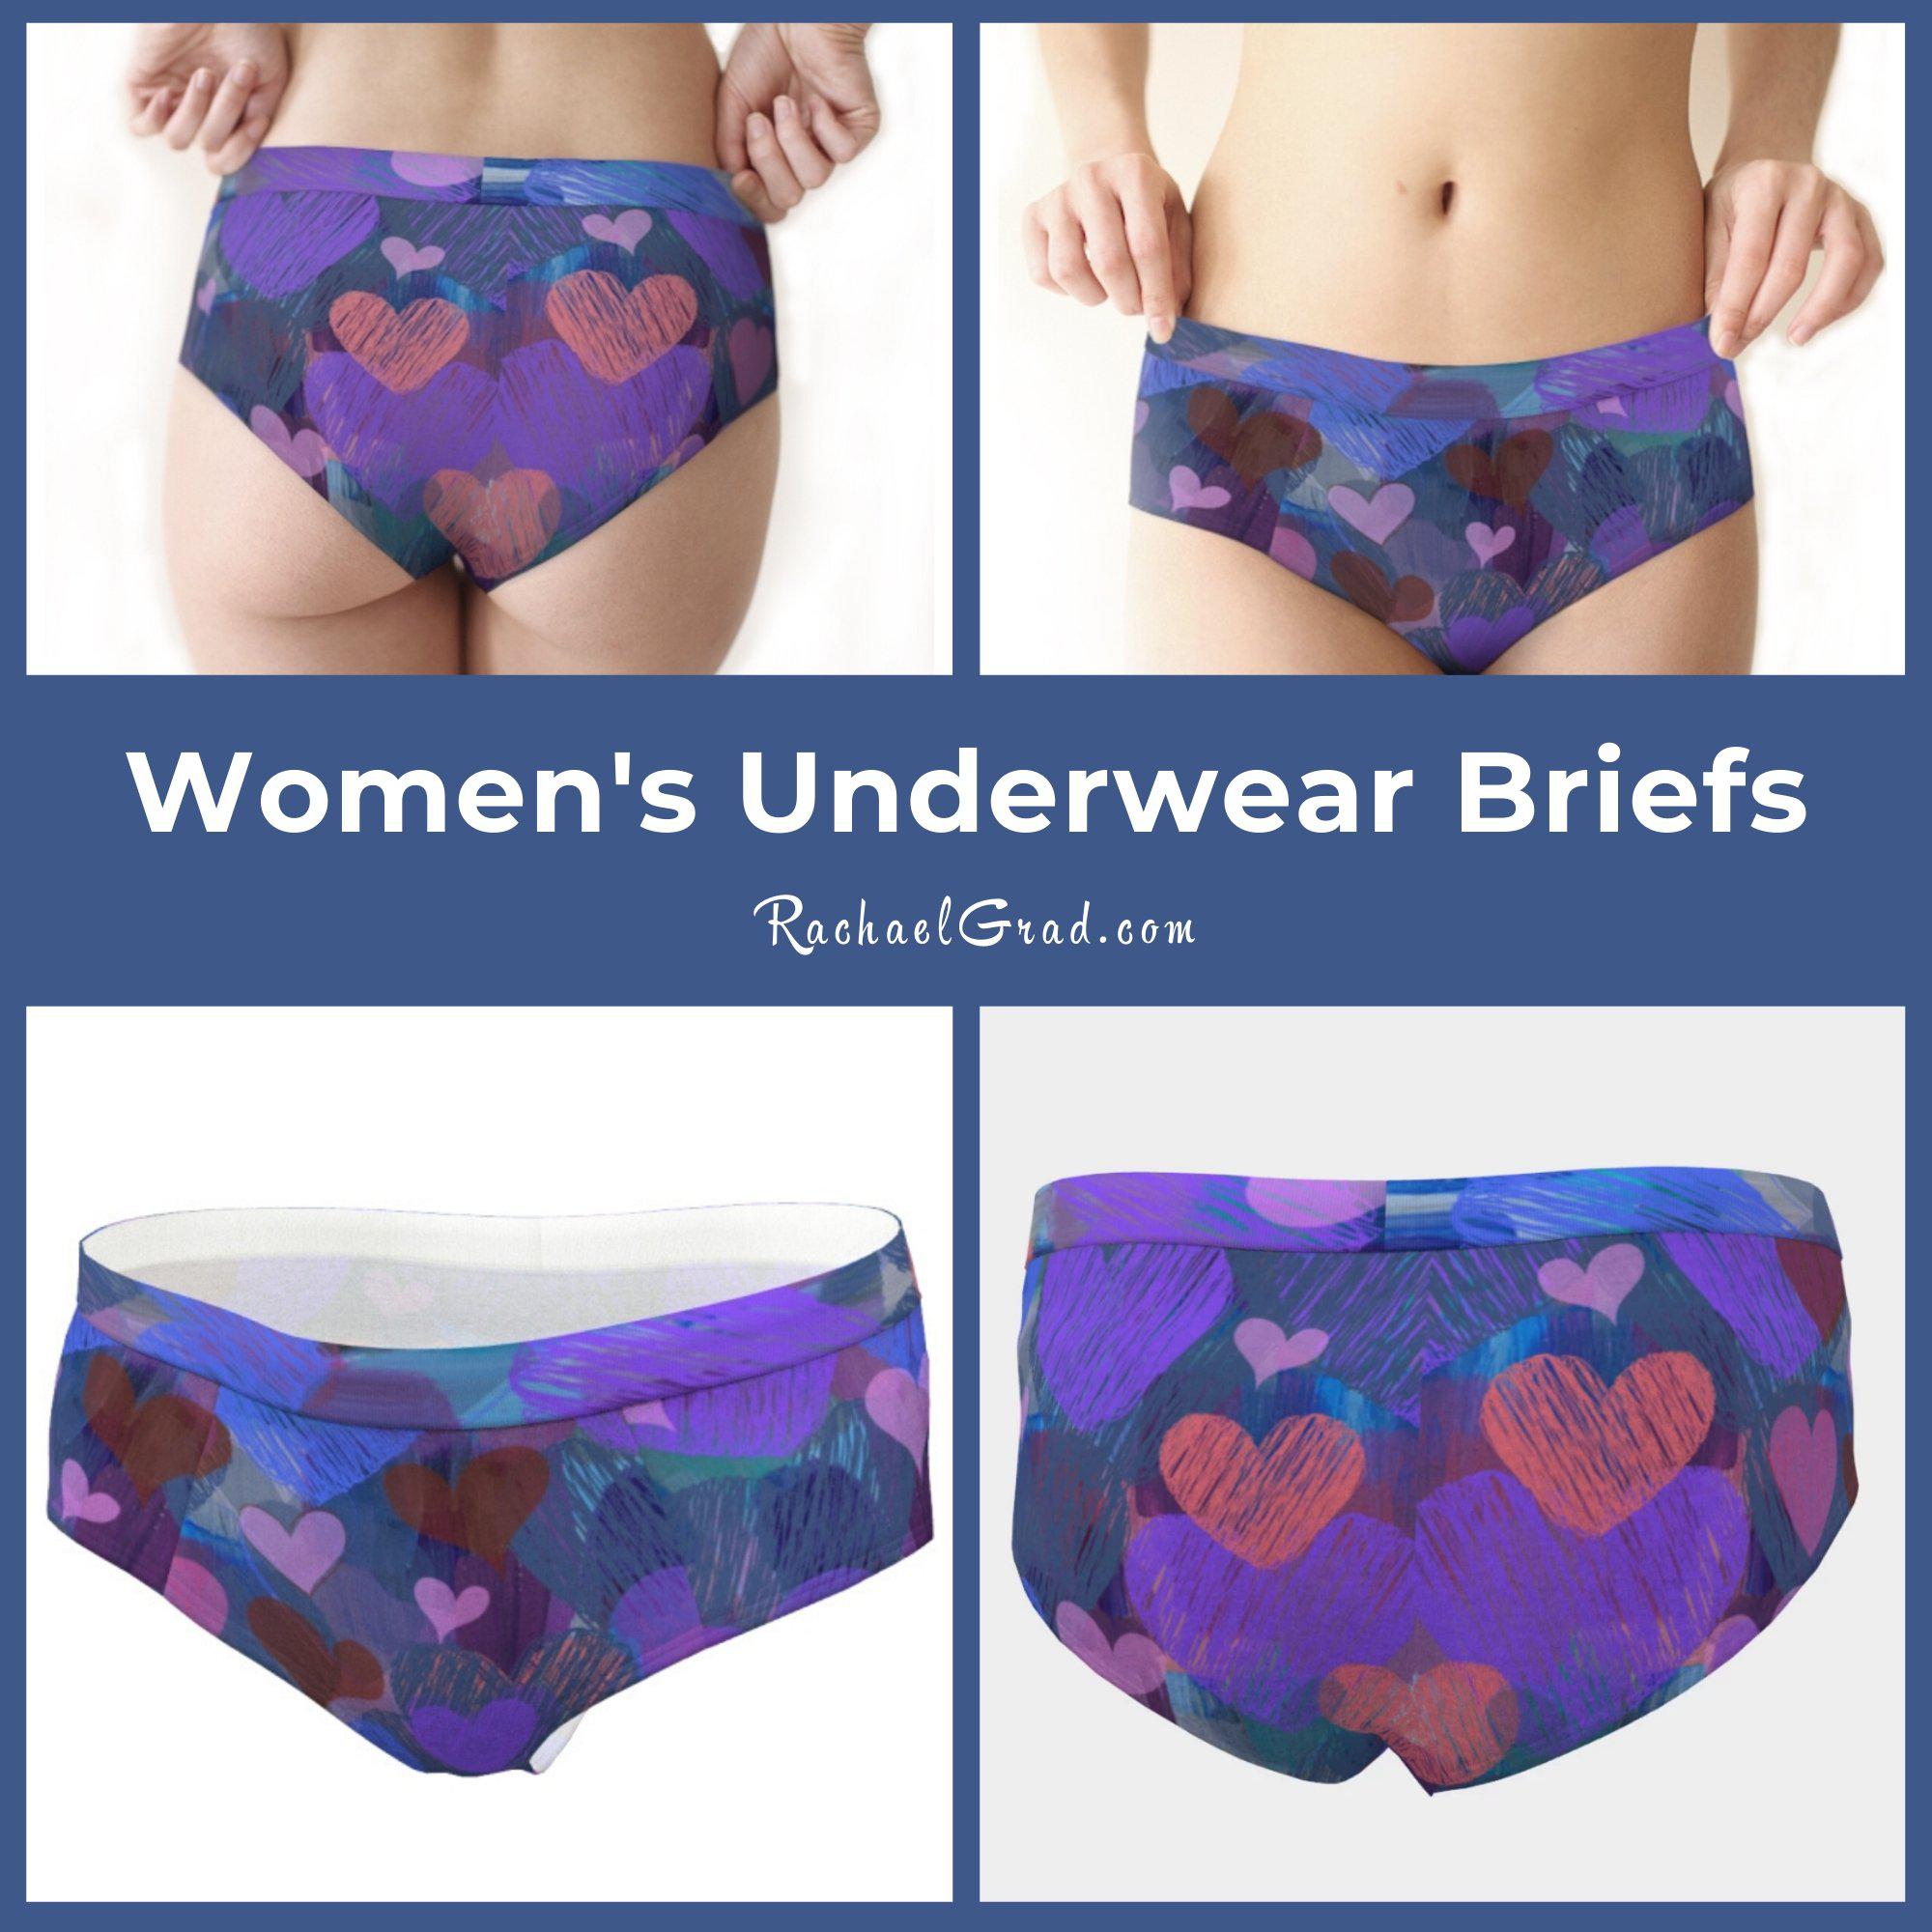 Matching His and Hers Valentine Underwear -  Canada